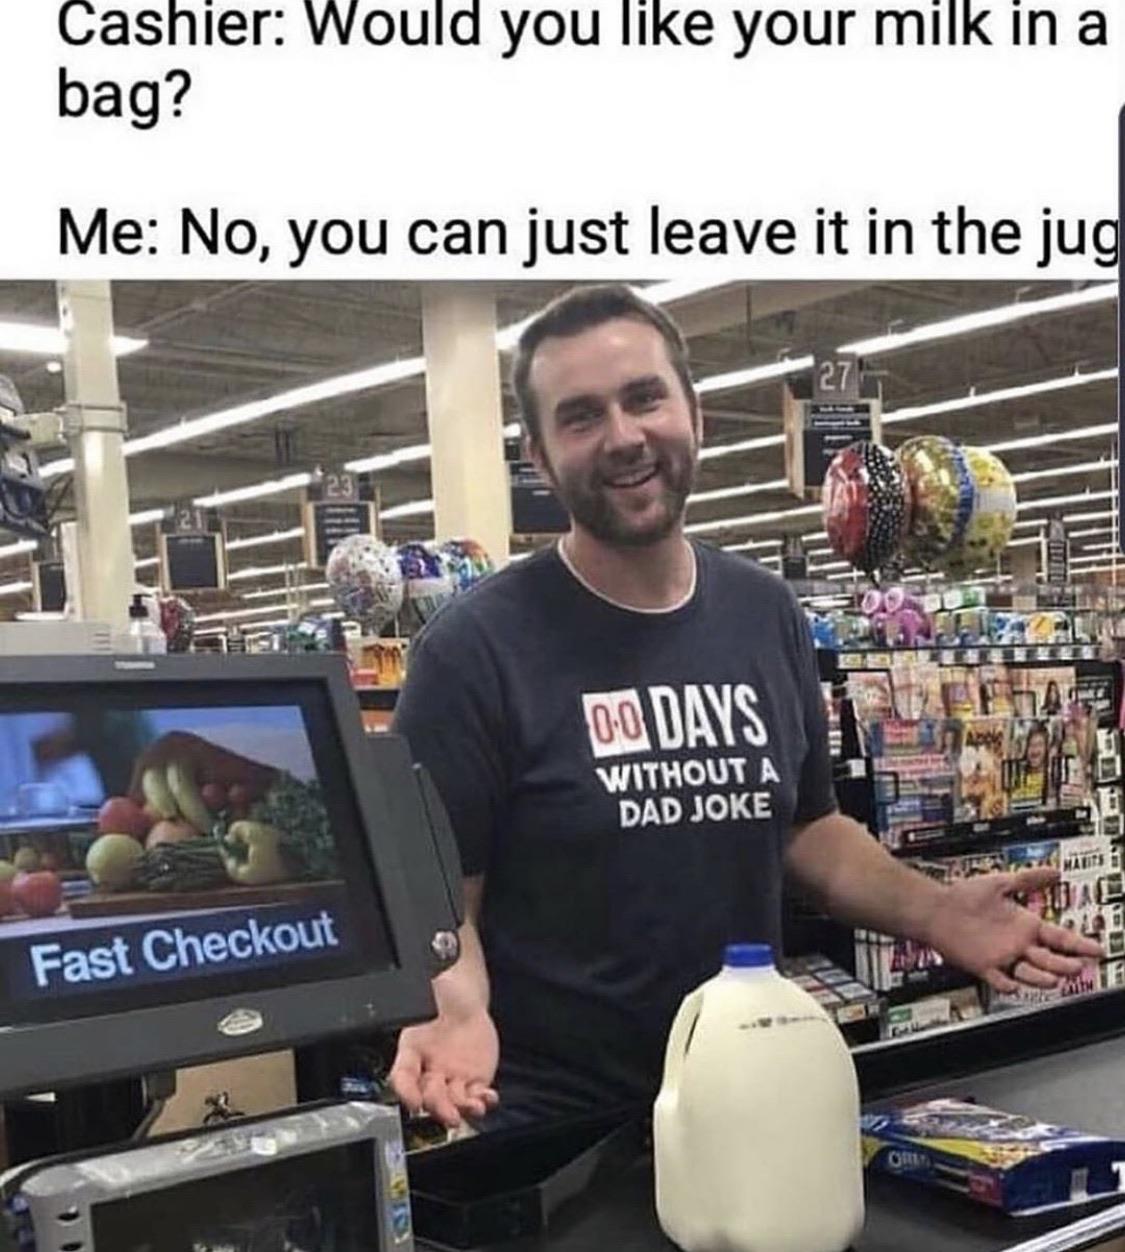 random memes and pics - would you like your milk in a bag - Cashier Would you your milk in a bag? Me No, you can just leave it in the jug Oo Days Without A Dad Joke Marts Fast Checkout